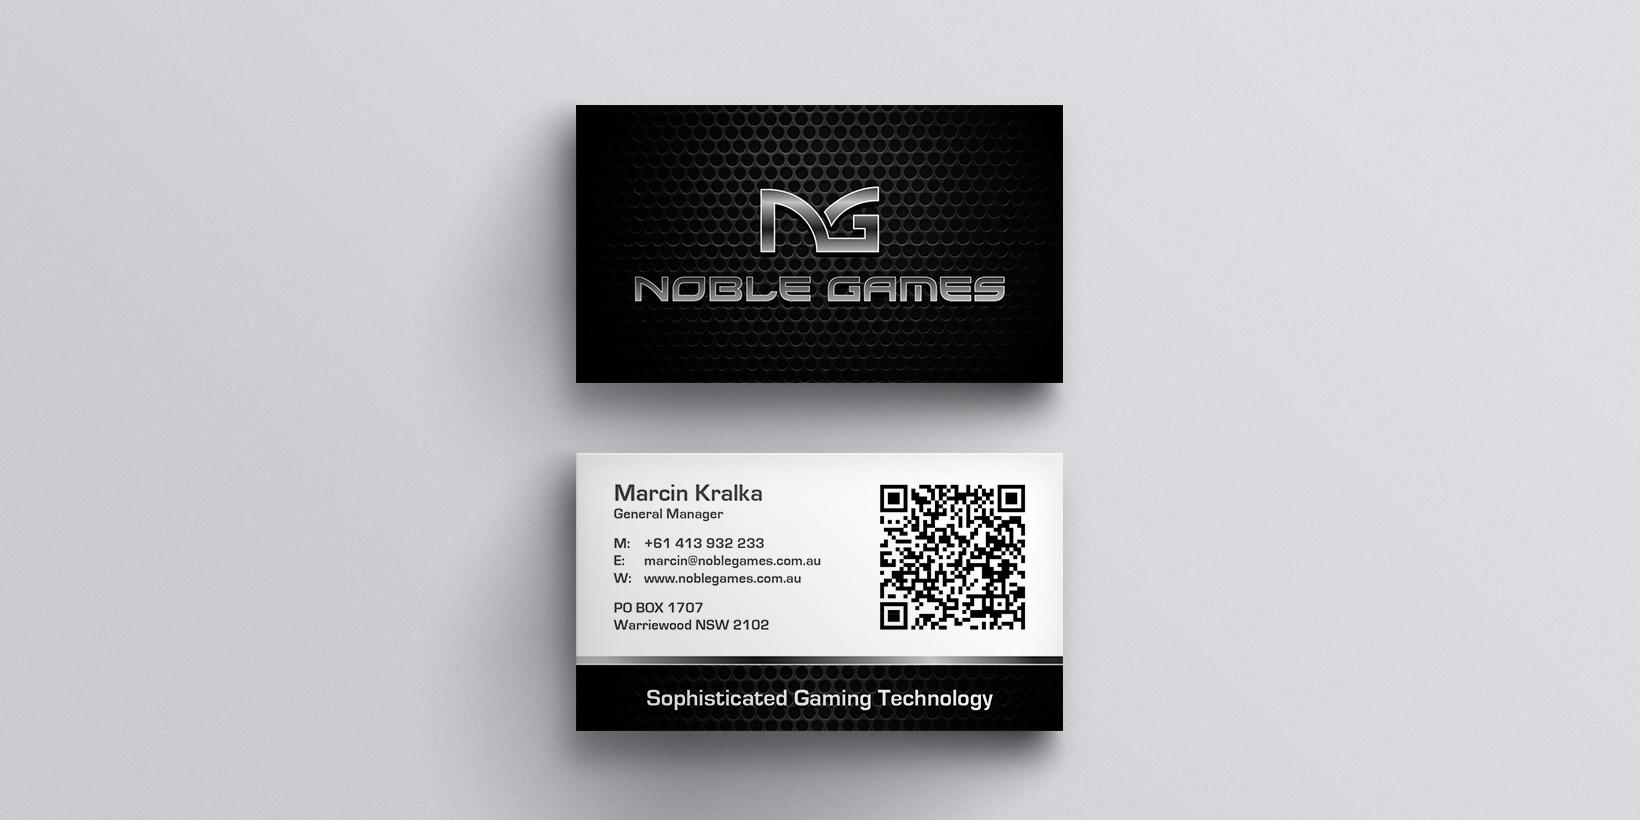 Nobel Games Brand Identity and Website Development by Think Creative Agency6